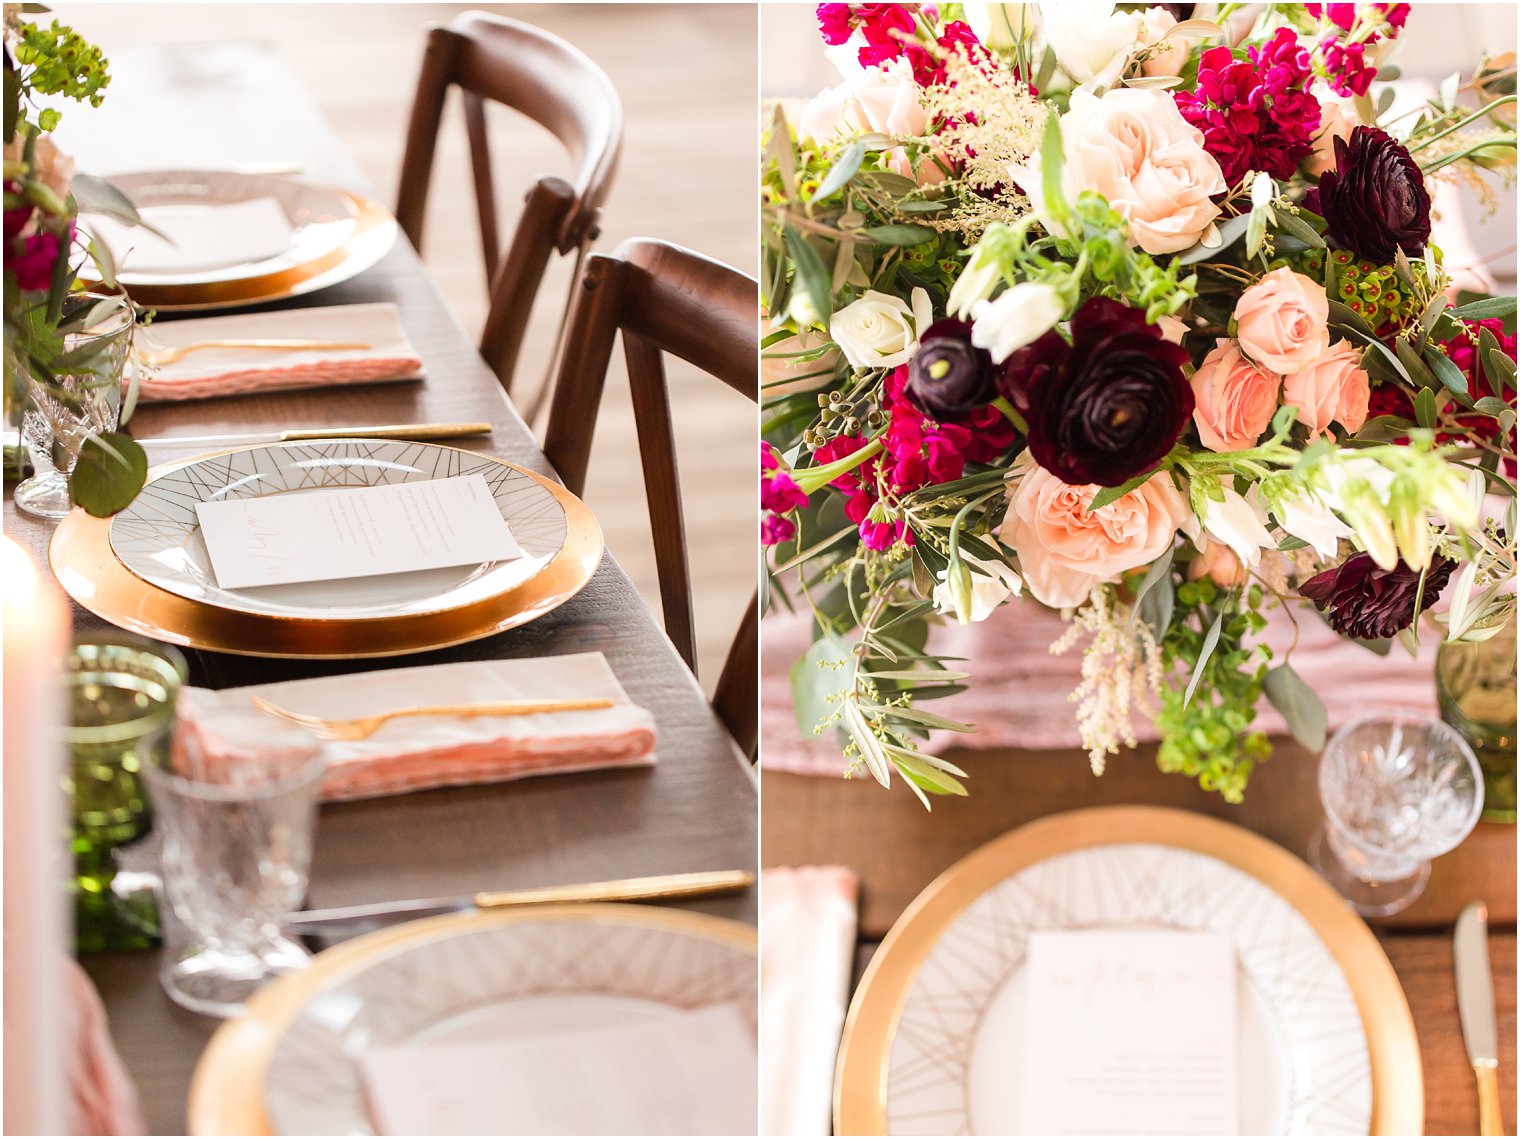 Rentals by Rustic Drift | Florals by Lily in the Valley Florist | Photos by Idalia Photography